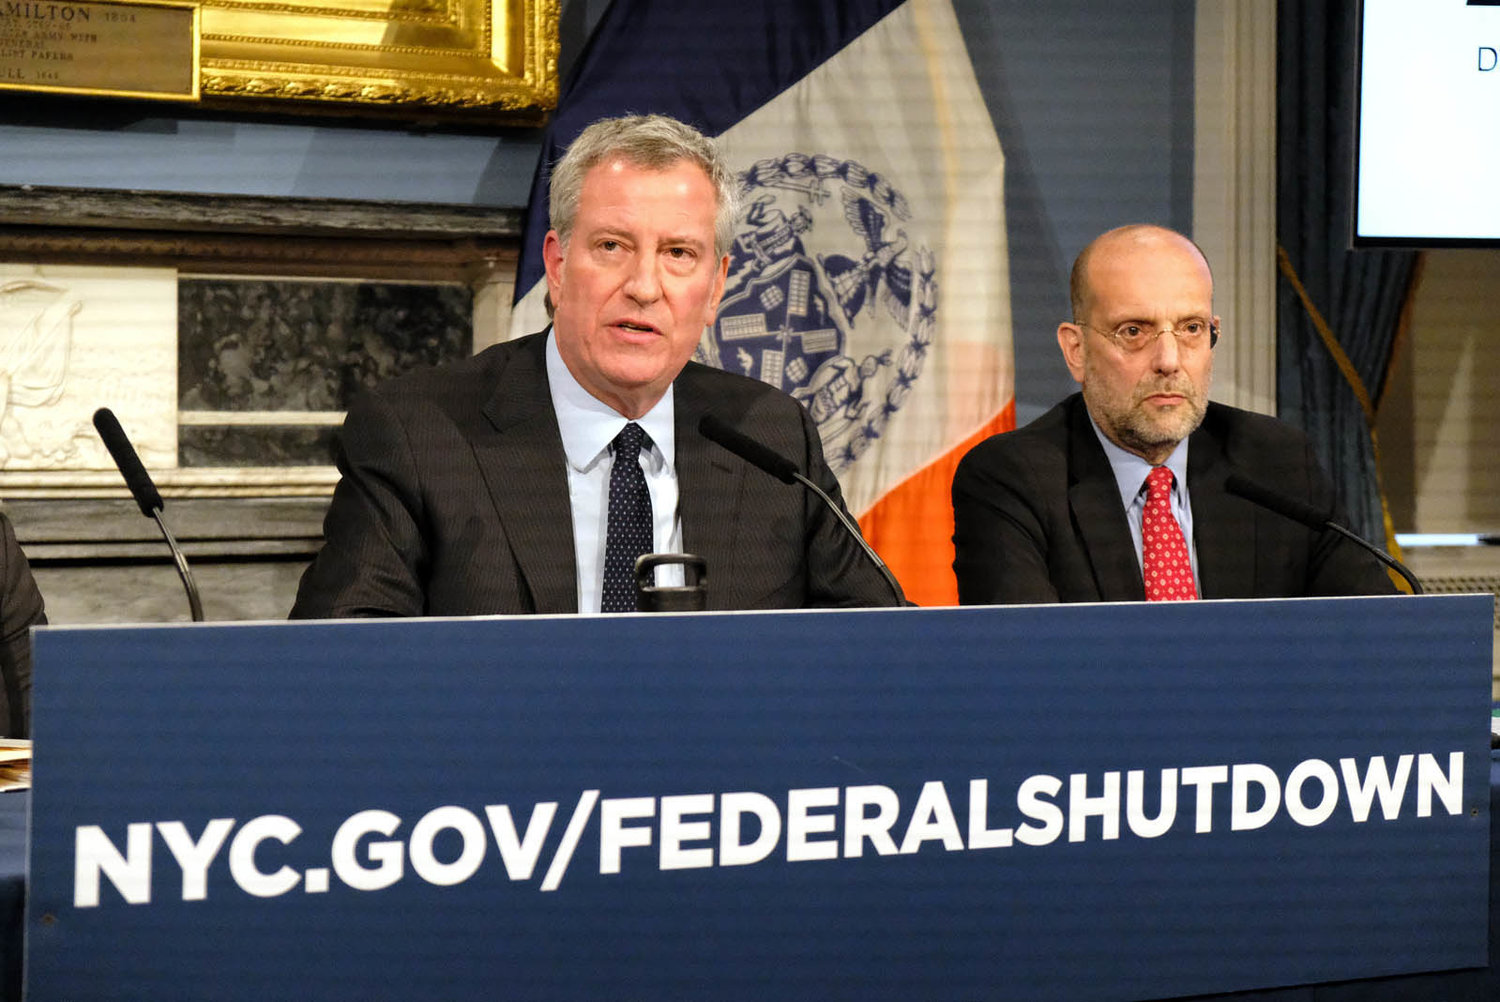 ‘TRYING TO PAY PEOPLE FAIRLY’: Mayor de Blasio, asked during an unrelated press conference about the wide gulf in salaries between Emergency Medical Service workers and other first-responders that accounts for a high turnover rate at EMS, replied, ‘We are trying to make sure people are treated fairly and paid fairly, but I do think the work is different.’